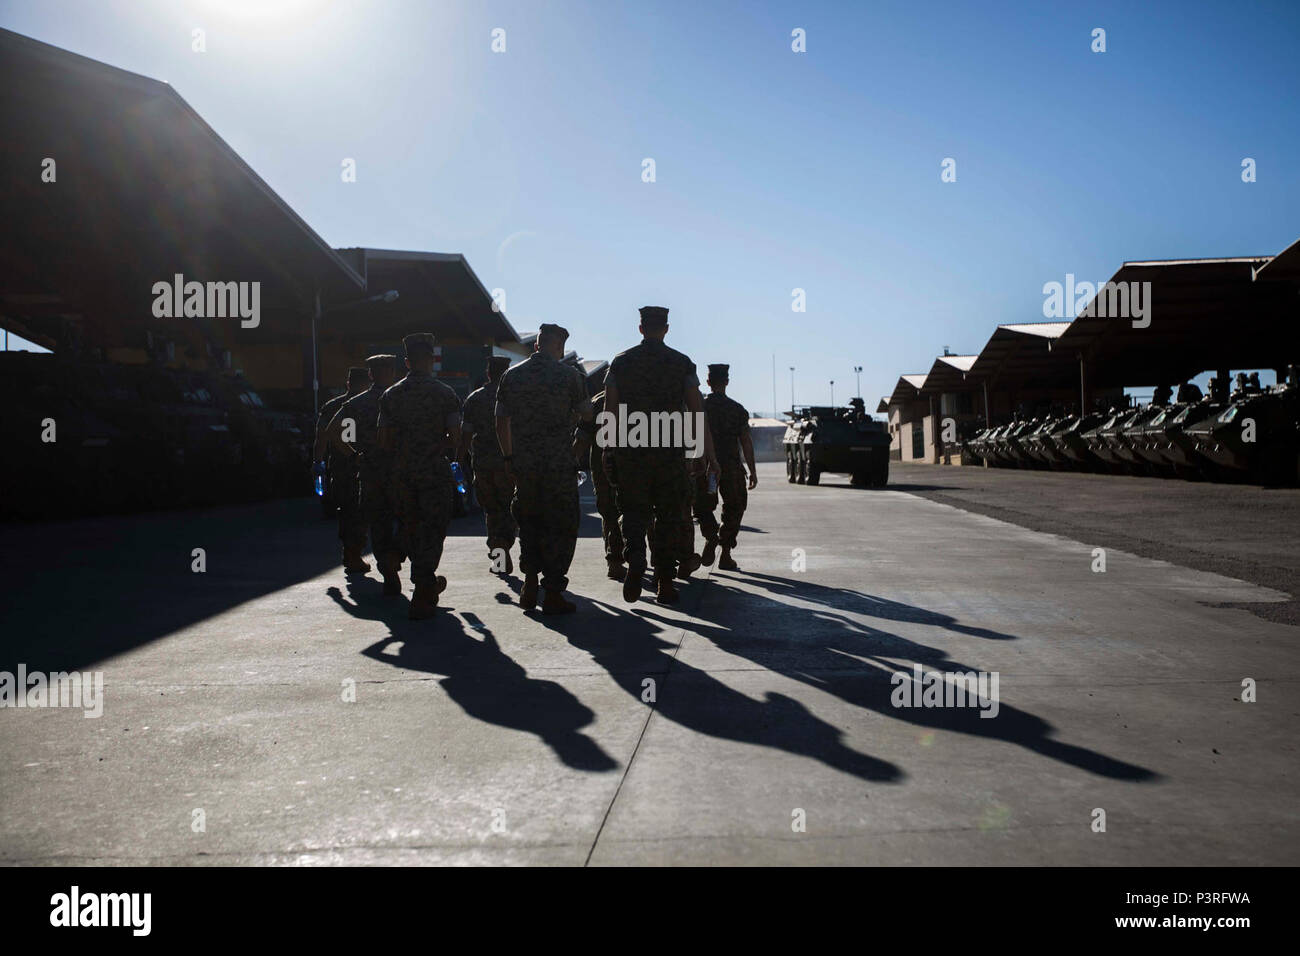 Marines assigned to Special Purpose Marine Air-Ground Task Force-Crisis Response-Africa combat logistics element receive a tour of La Legión Base Militar, Viator, Spain, April 8, 2017. SPMAGTF-CR-AF deployed to conduct limited crisis response and theater security operations in Europe and North Africa. Stock Photo